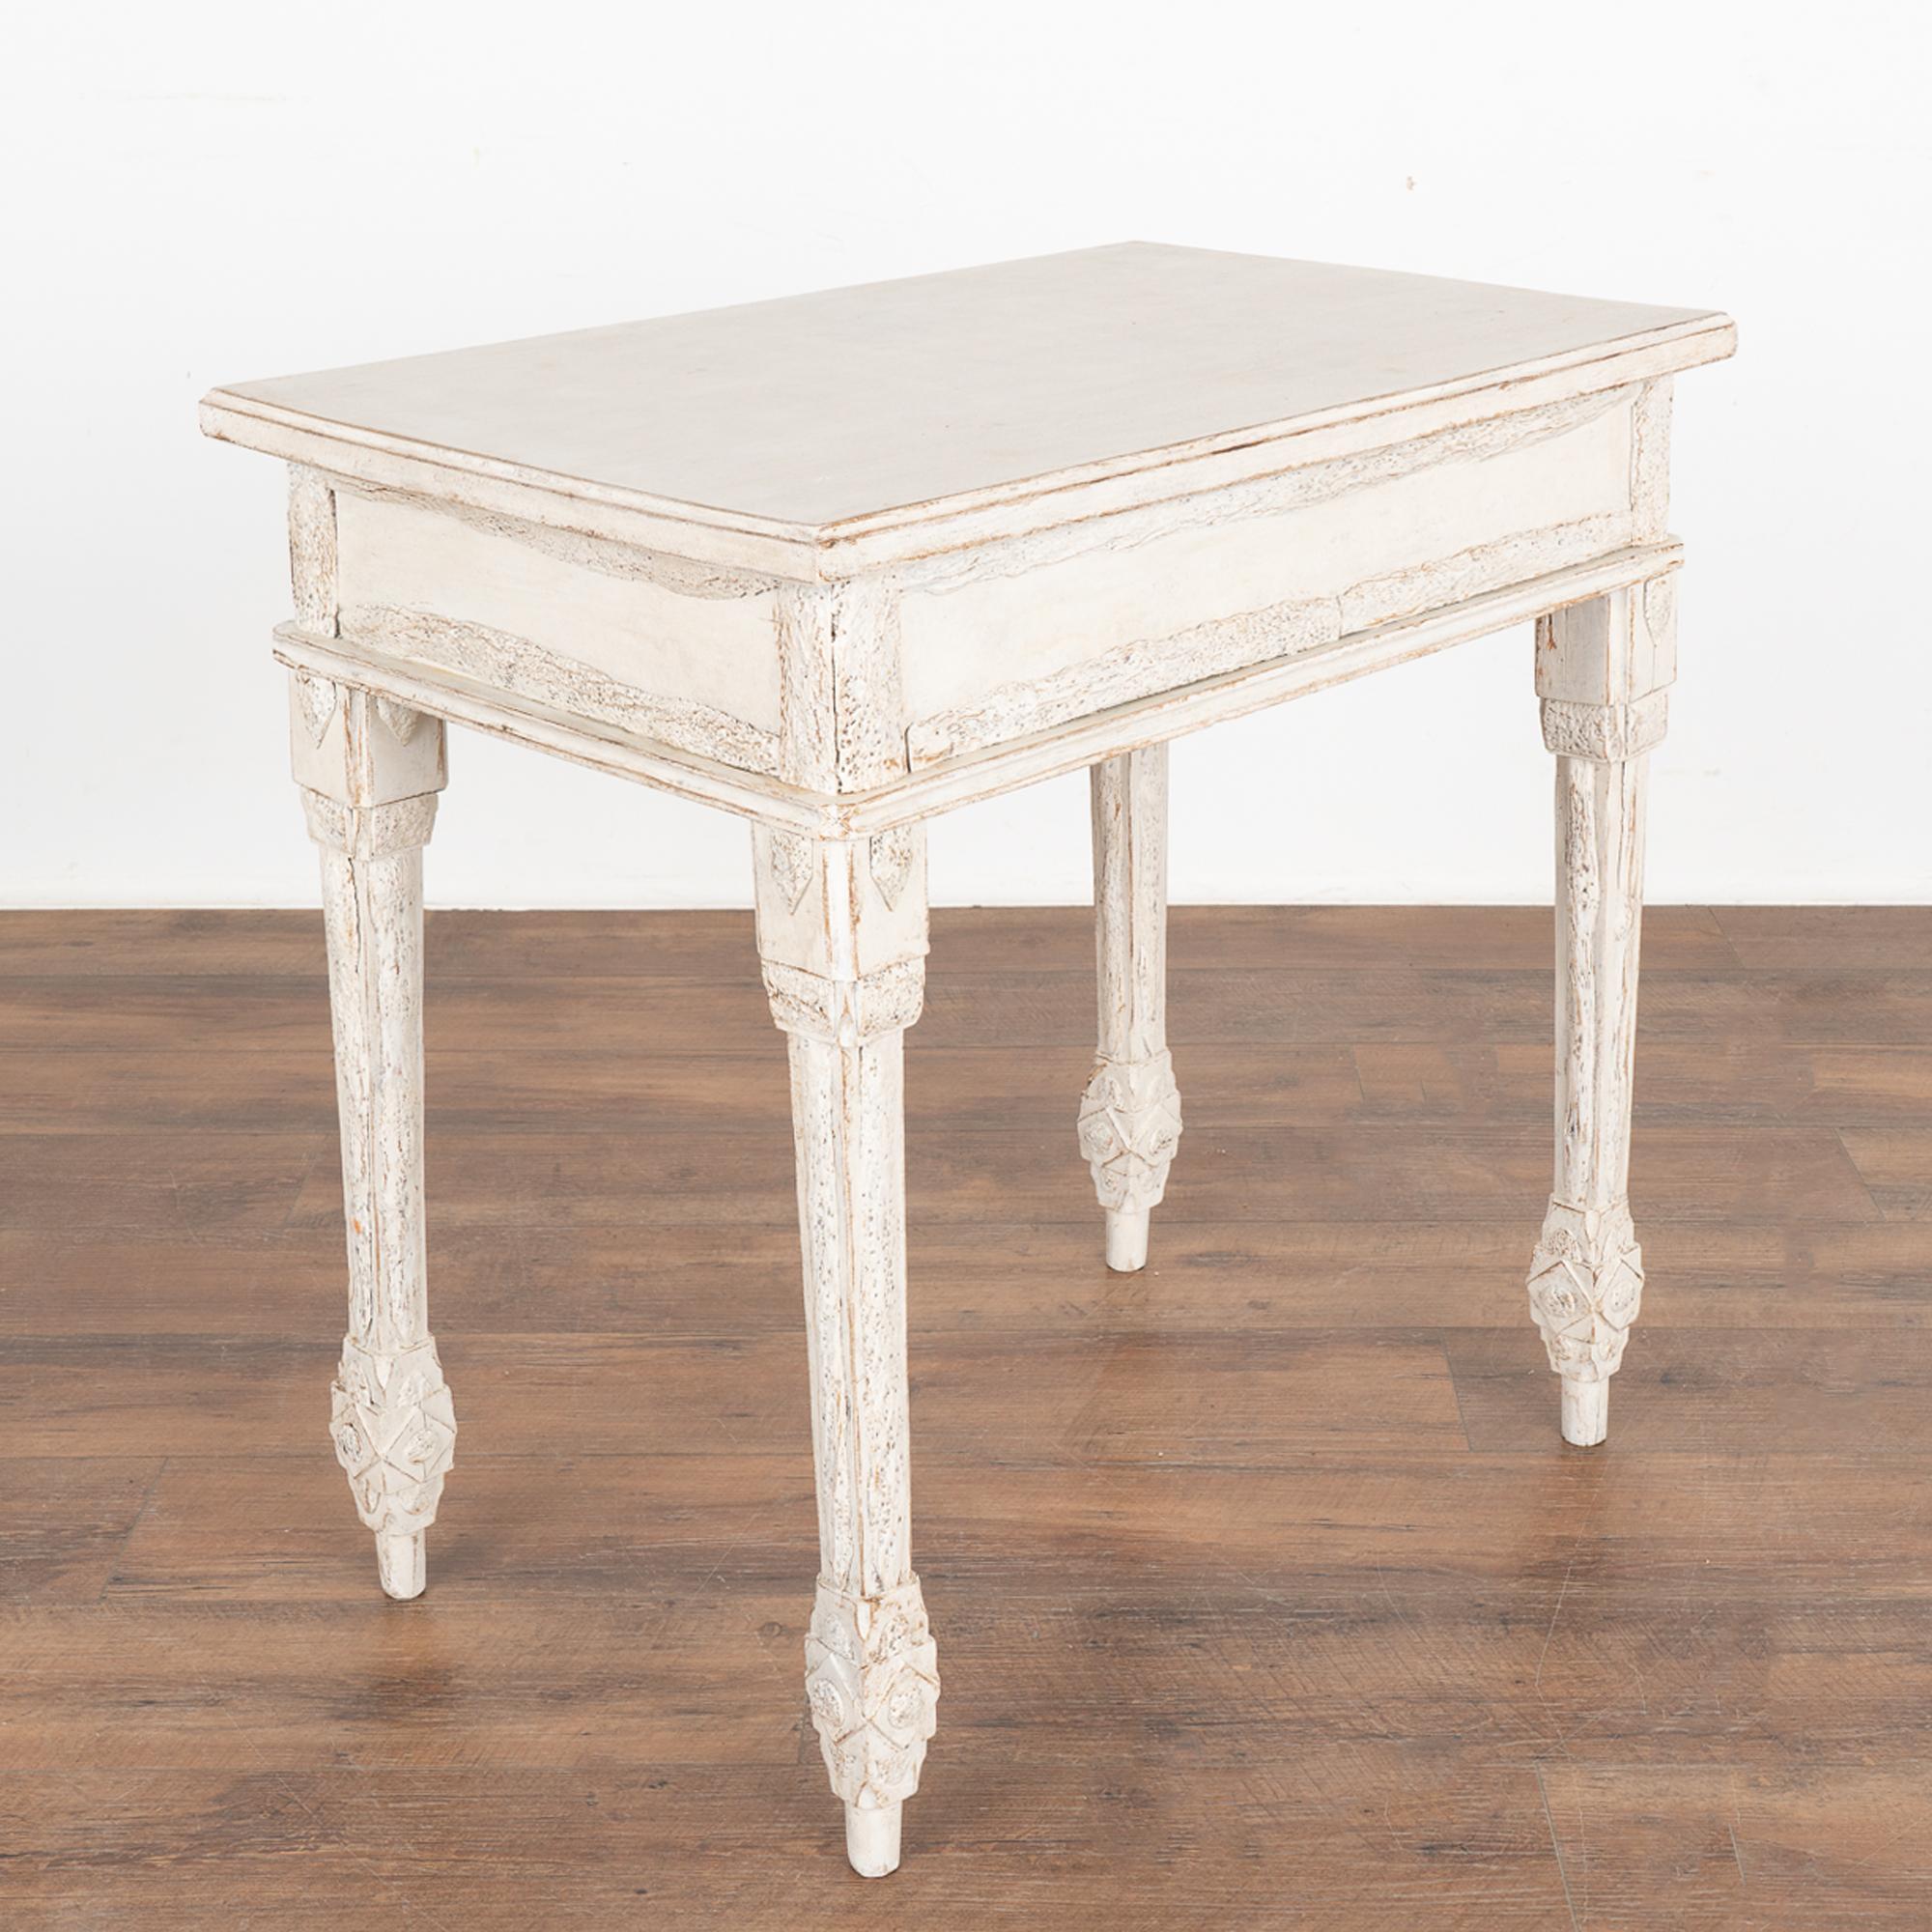 White Painted Small Side Table With Three Drawers, Sweden circa 1890 For Sale 6